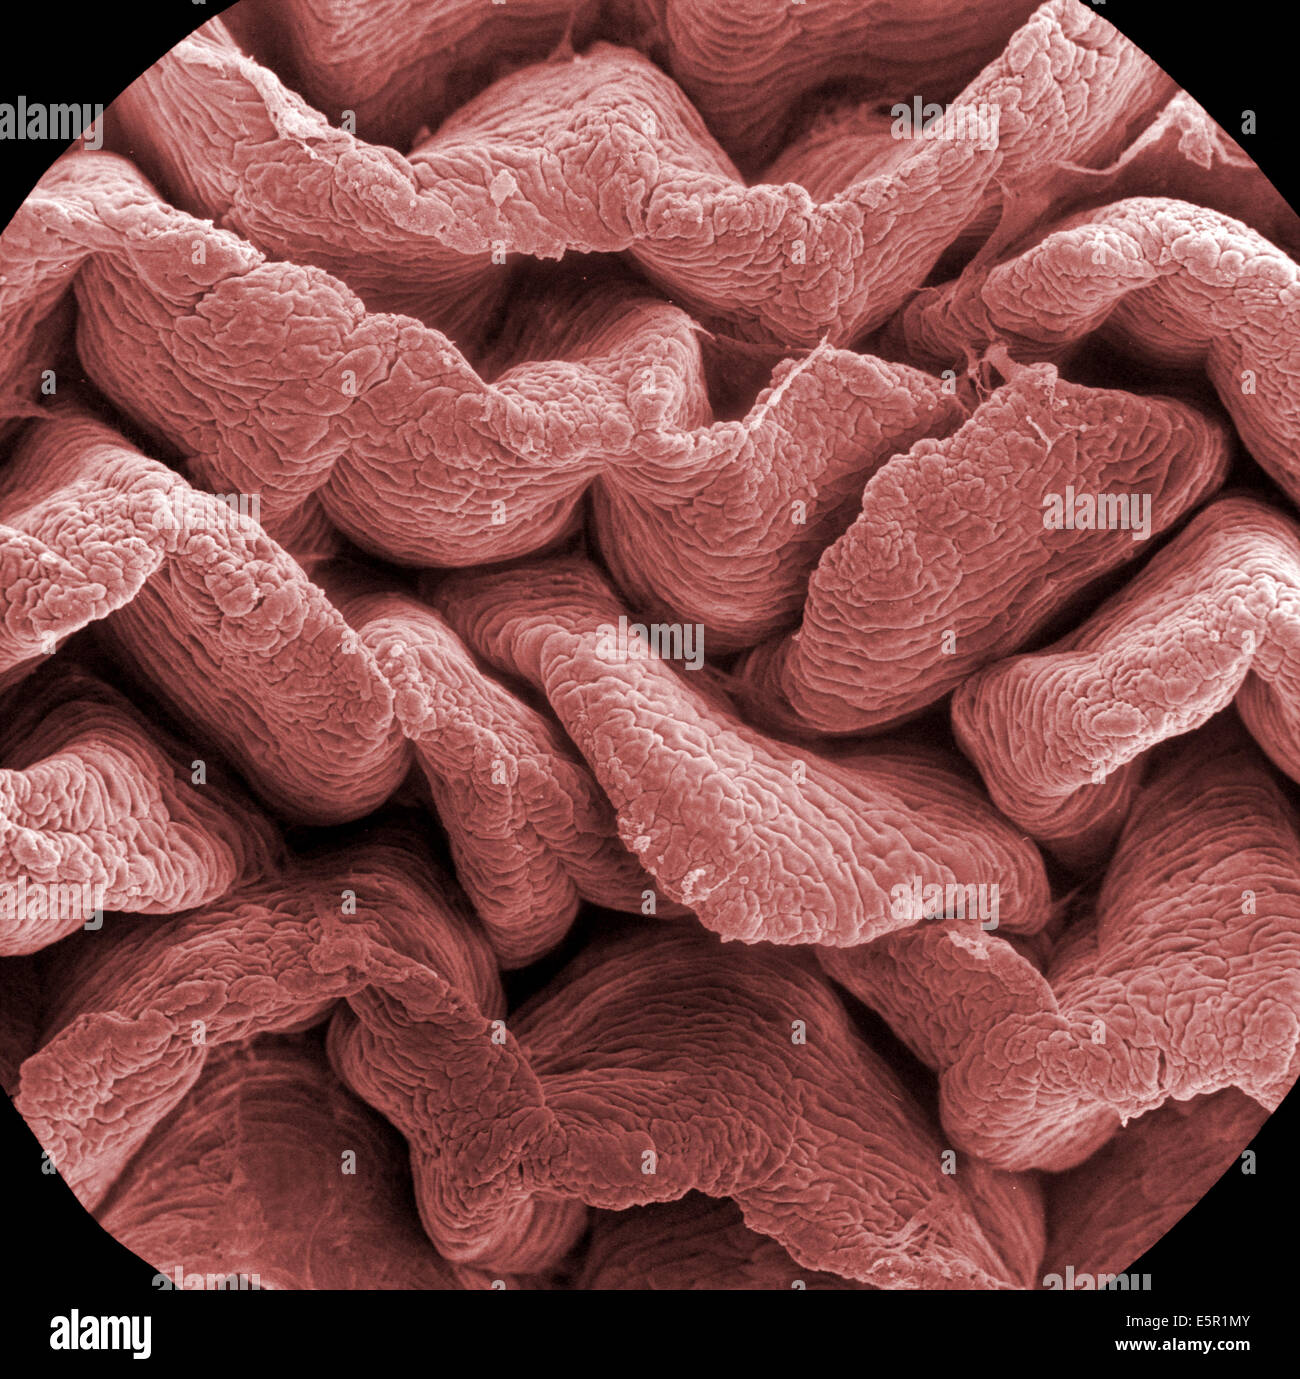 Scanning electron micrograph (SEM) of an absorptive epithelial cells lining the surface of the small intestine, showing Stock Photo